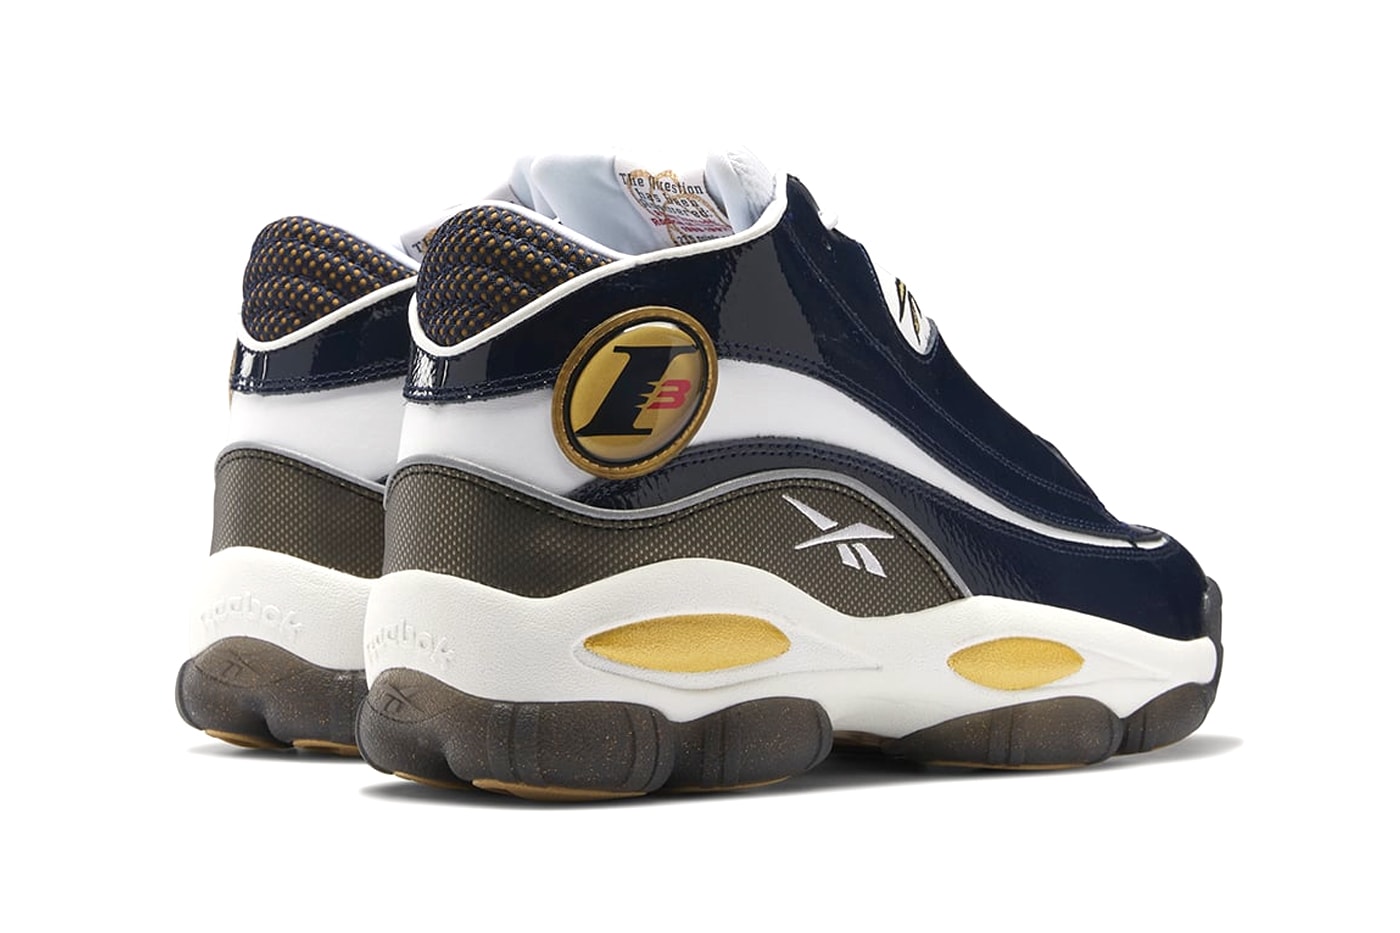 Reebok Answer DMX Georgetown march madness 2023 Mens Basketball collegiate pack release info date price